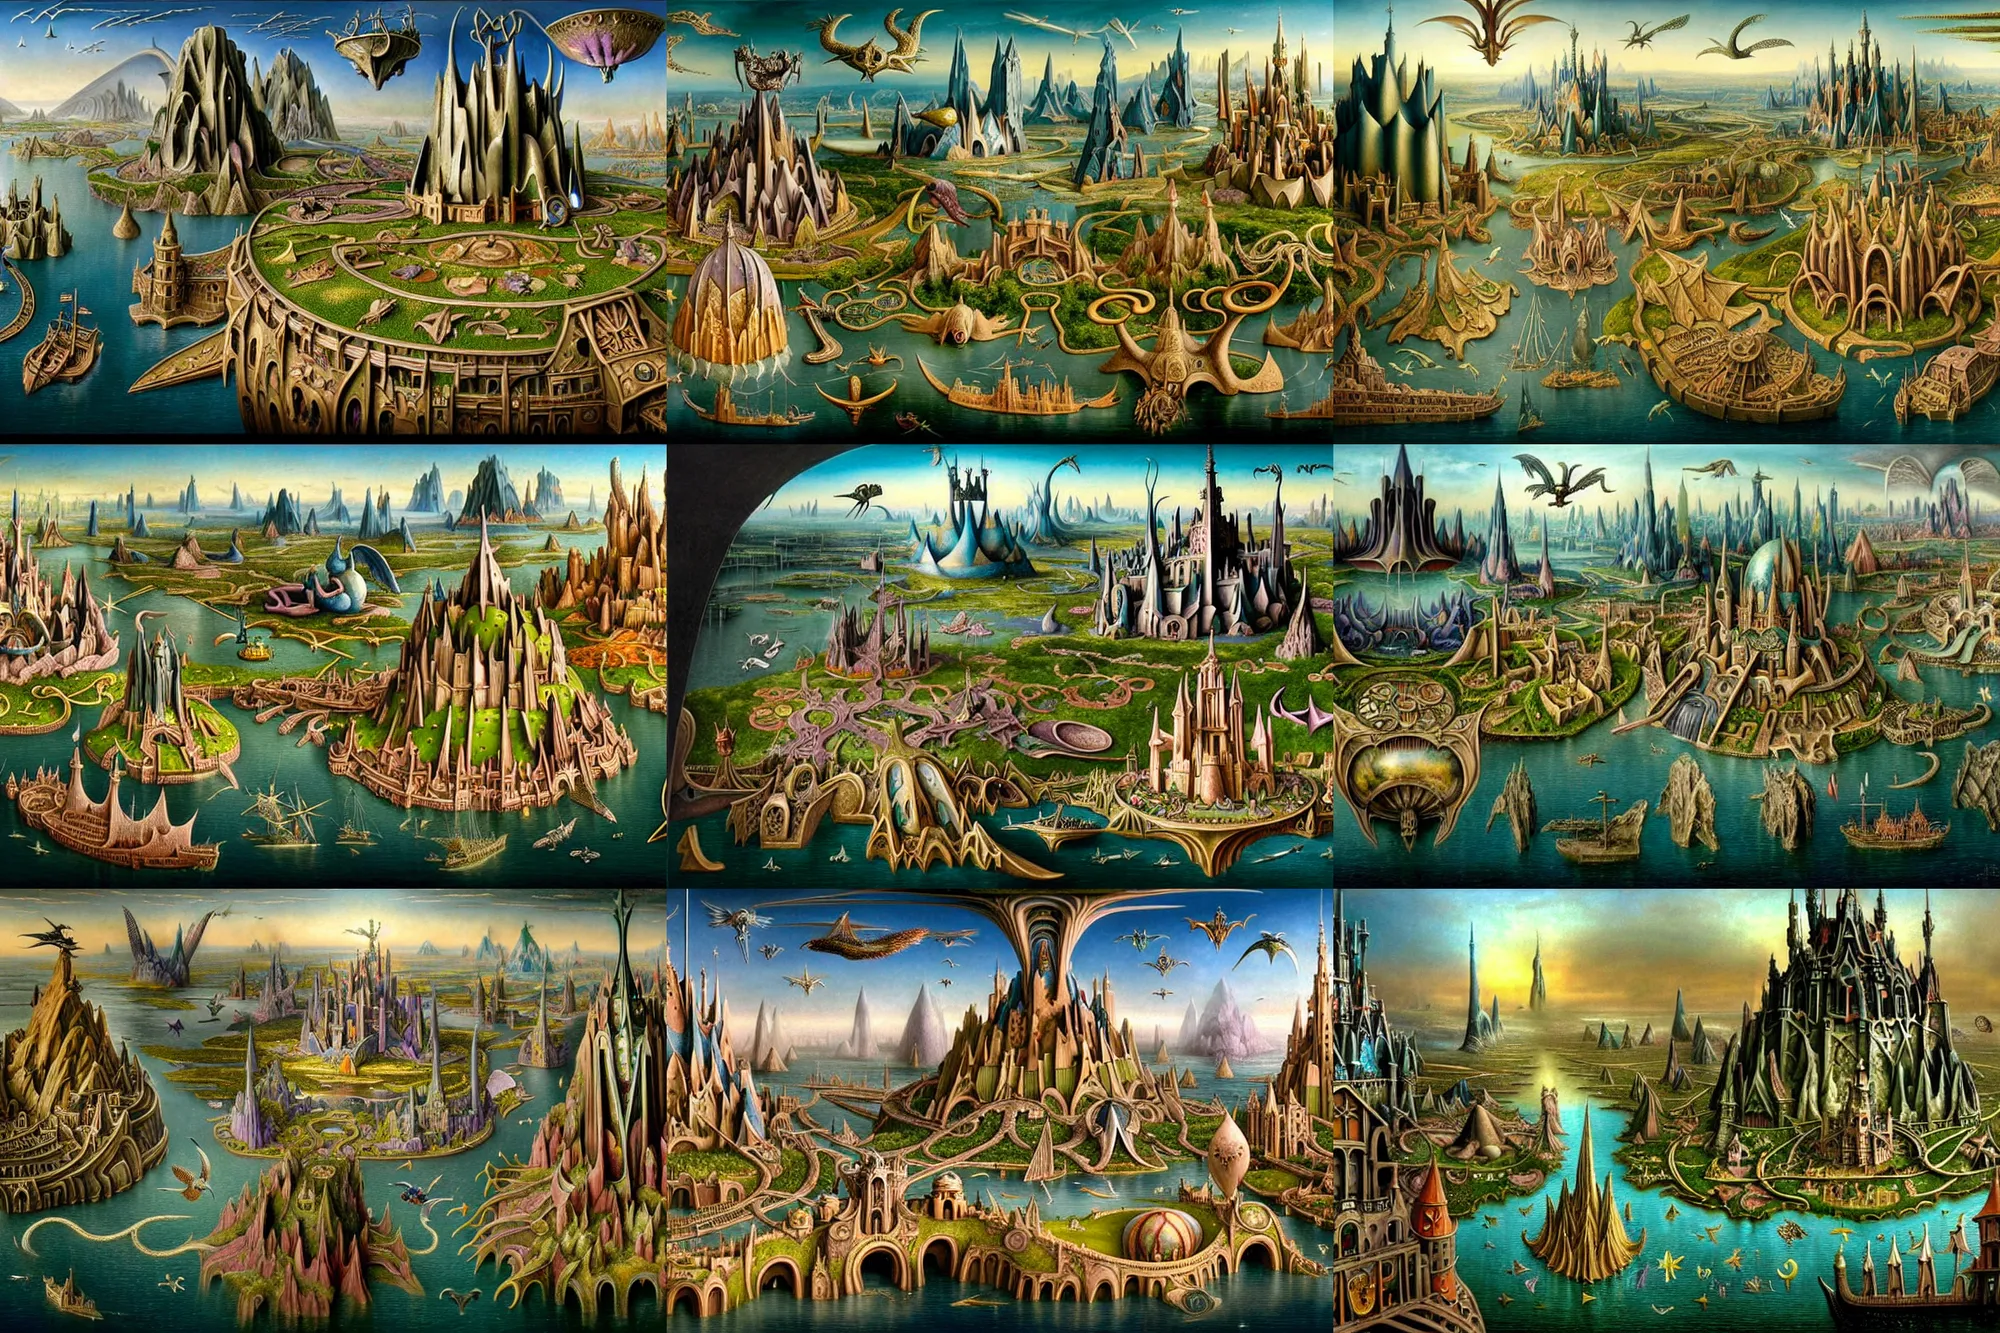 Prompt: a beautiful and insanely detailed matte painting of a magical mythical medieval sprawling city with surreal metal architecture and mythical flying creatures designed by Heironymous Bosch, mega structures inspired by Heironymous Bosch's Garden of Earthly Delights, ships in the harbor, by Jim Burns, rich pastel color palette, masterpiece!!, grand!, imaginative!!!, whimsical!!, intricate details, sense of awe, elite, fantasy realism, surreal landscape, complex layered composition!!